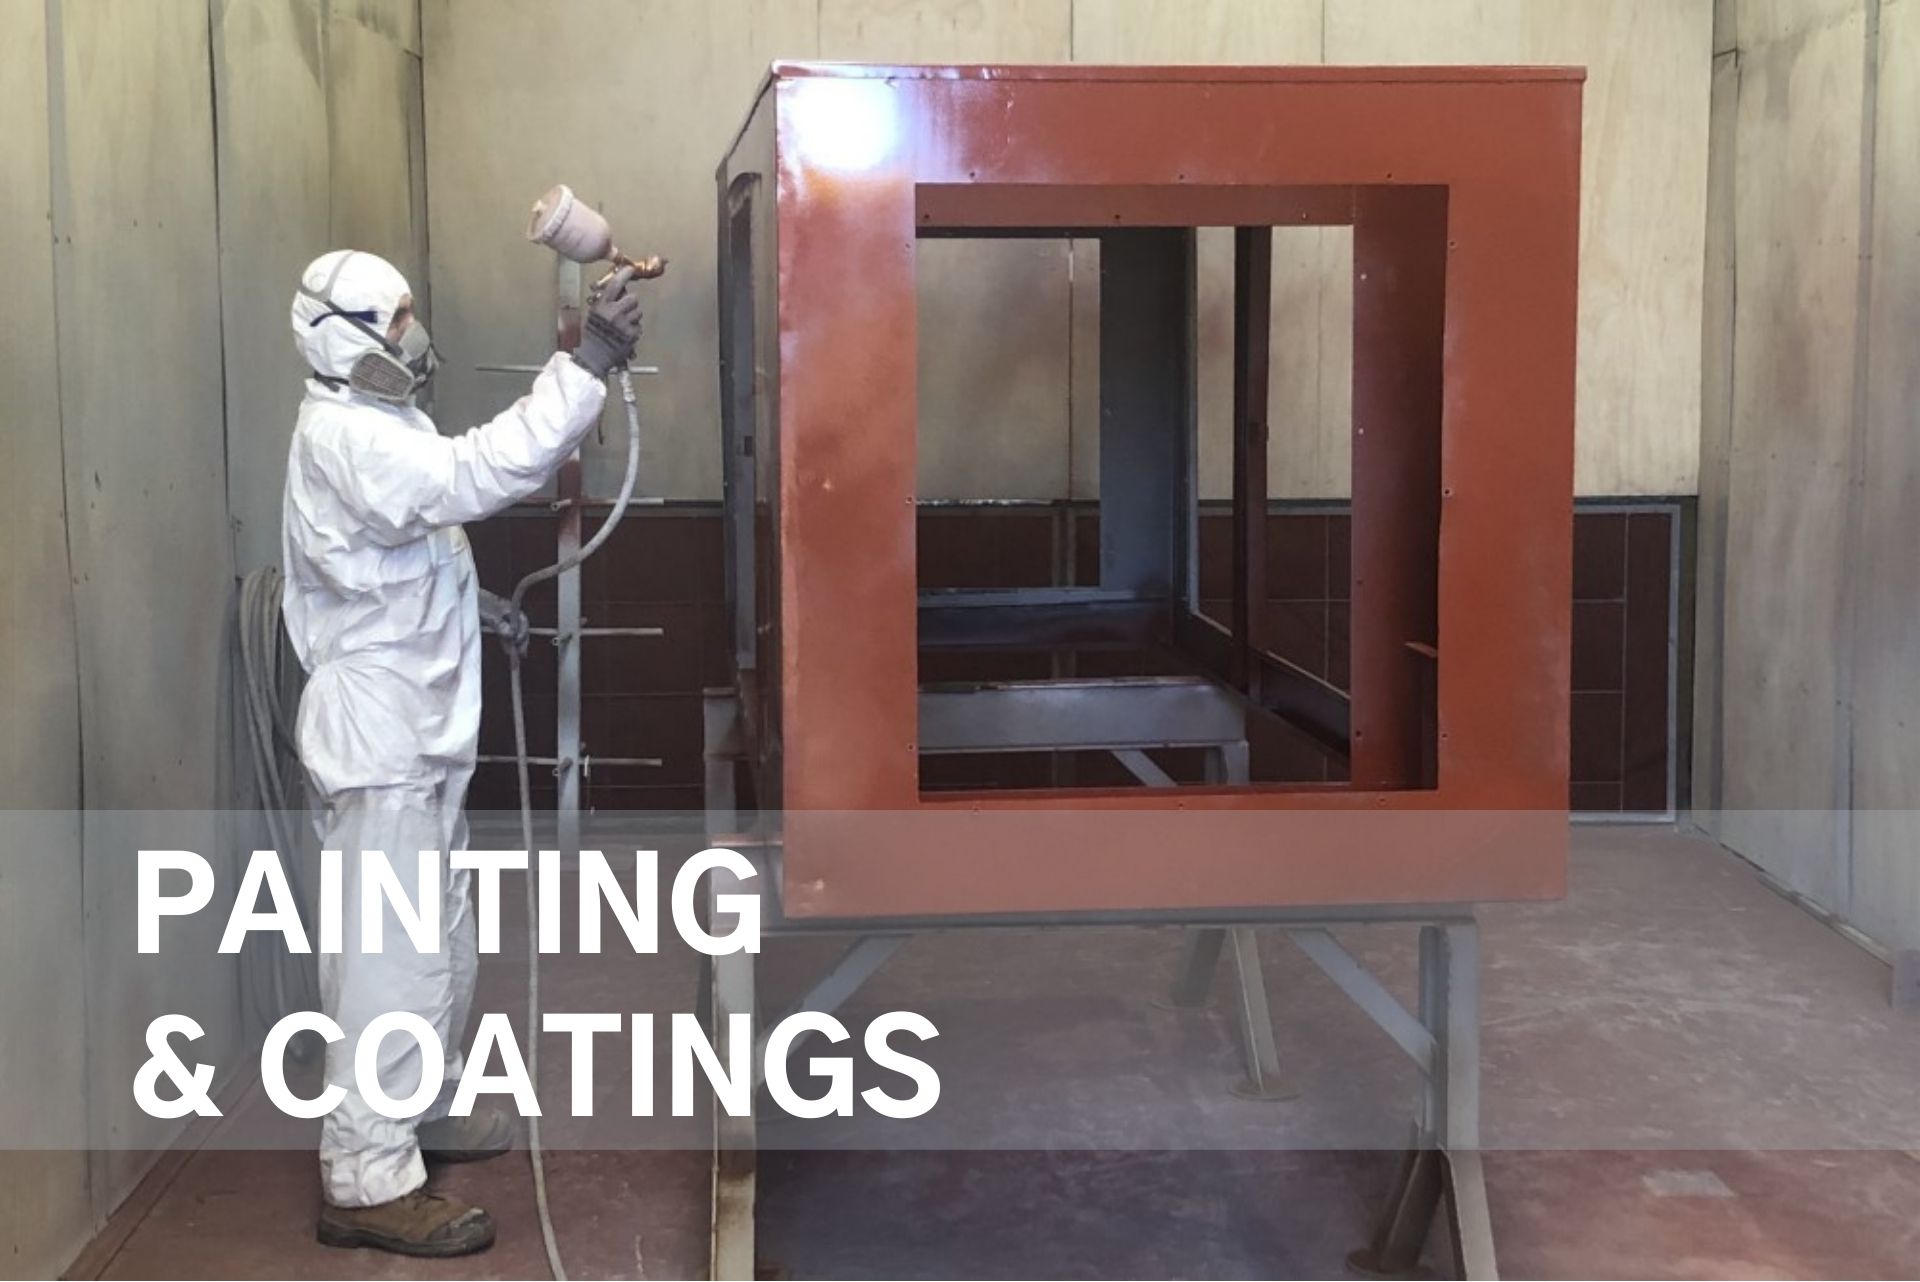 Inside the dedicated paint booth, WATMAR spray painting another manufactured product